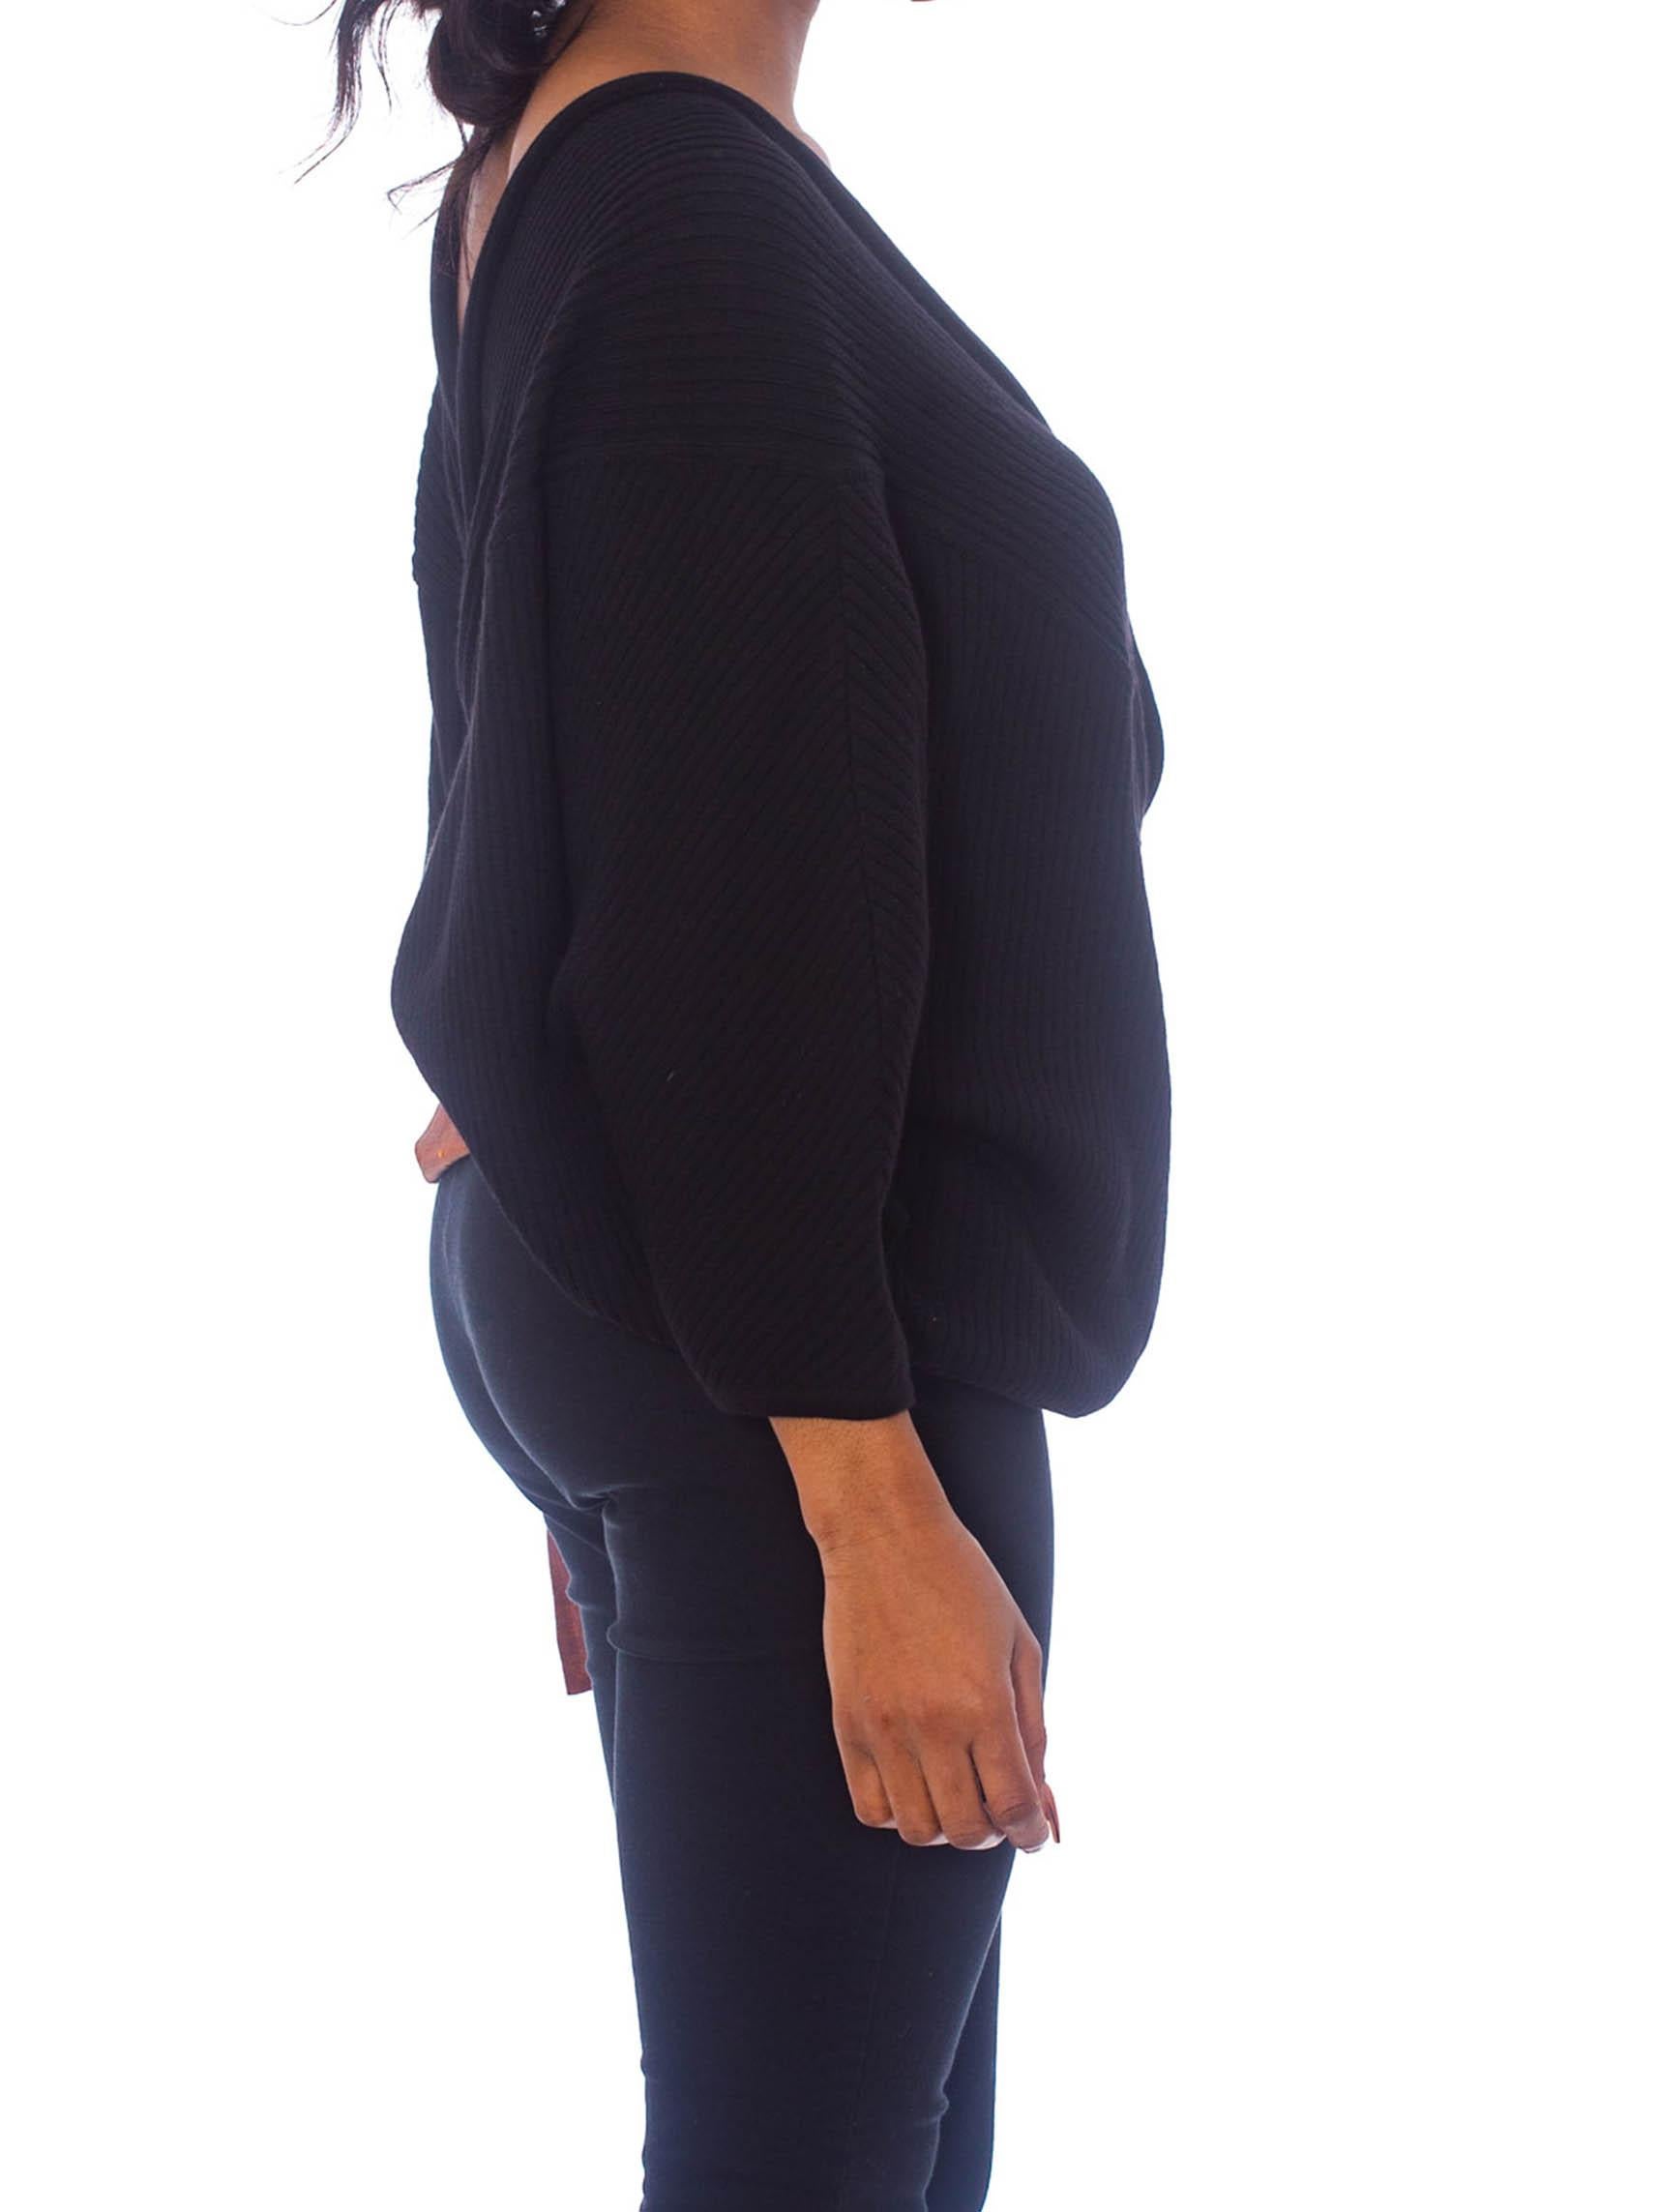 1980S GIANFRANCO FERRE Black Wool Knit Ribbed Wrap Sweater Top With Silk Taffet For Sale 2